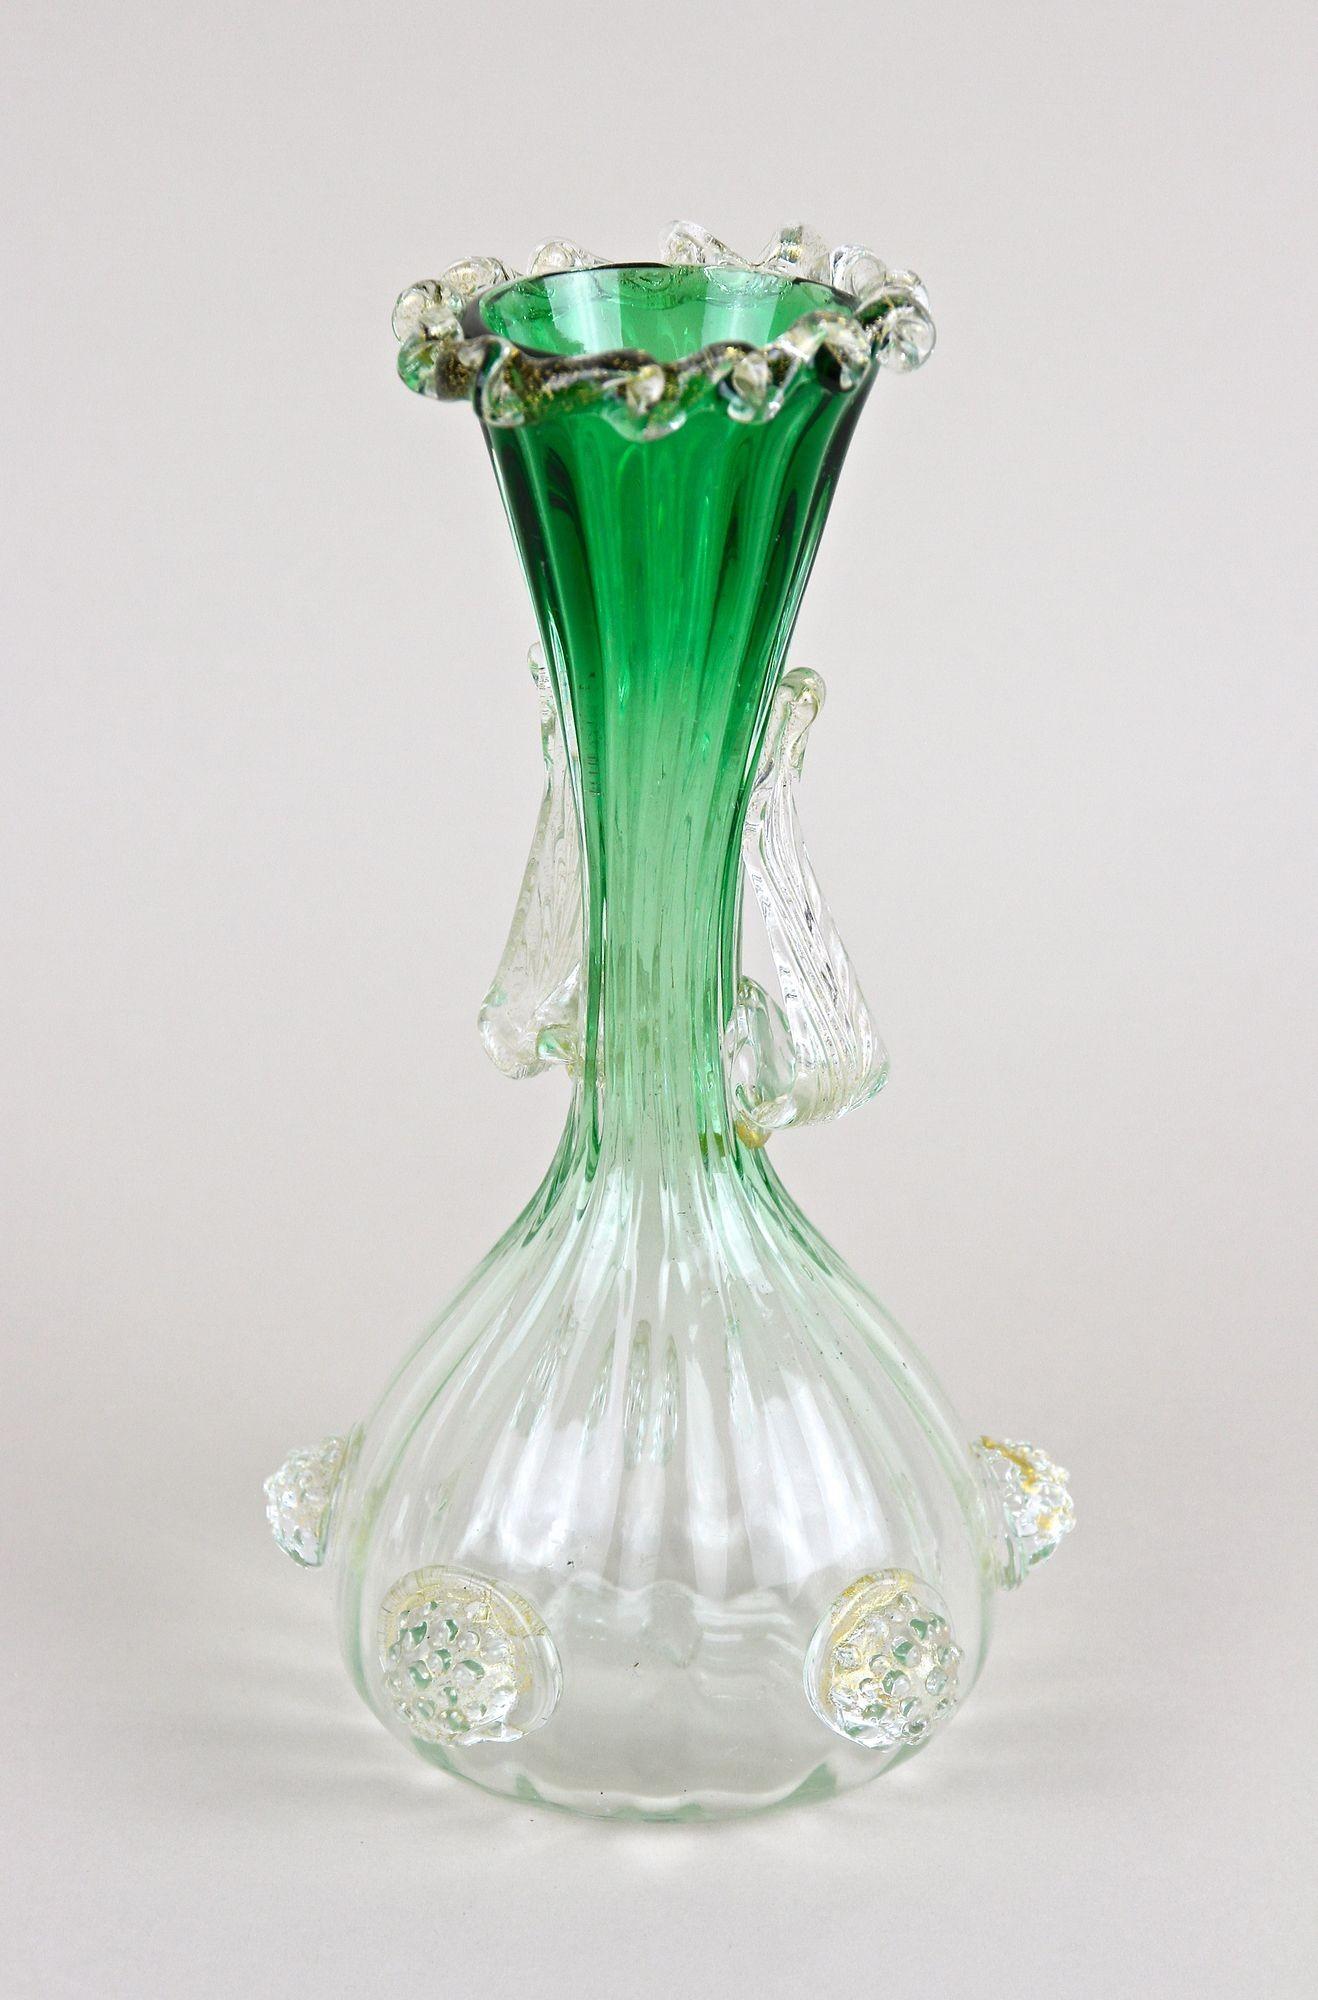 Green/ White Murano Glass Vase With 24k Gold Flakes by Fratelli Toso, IT ca 1930 For Sale 8